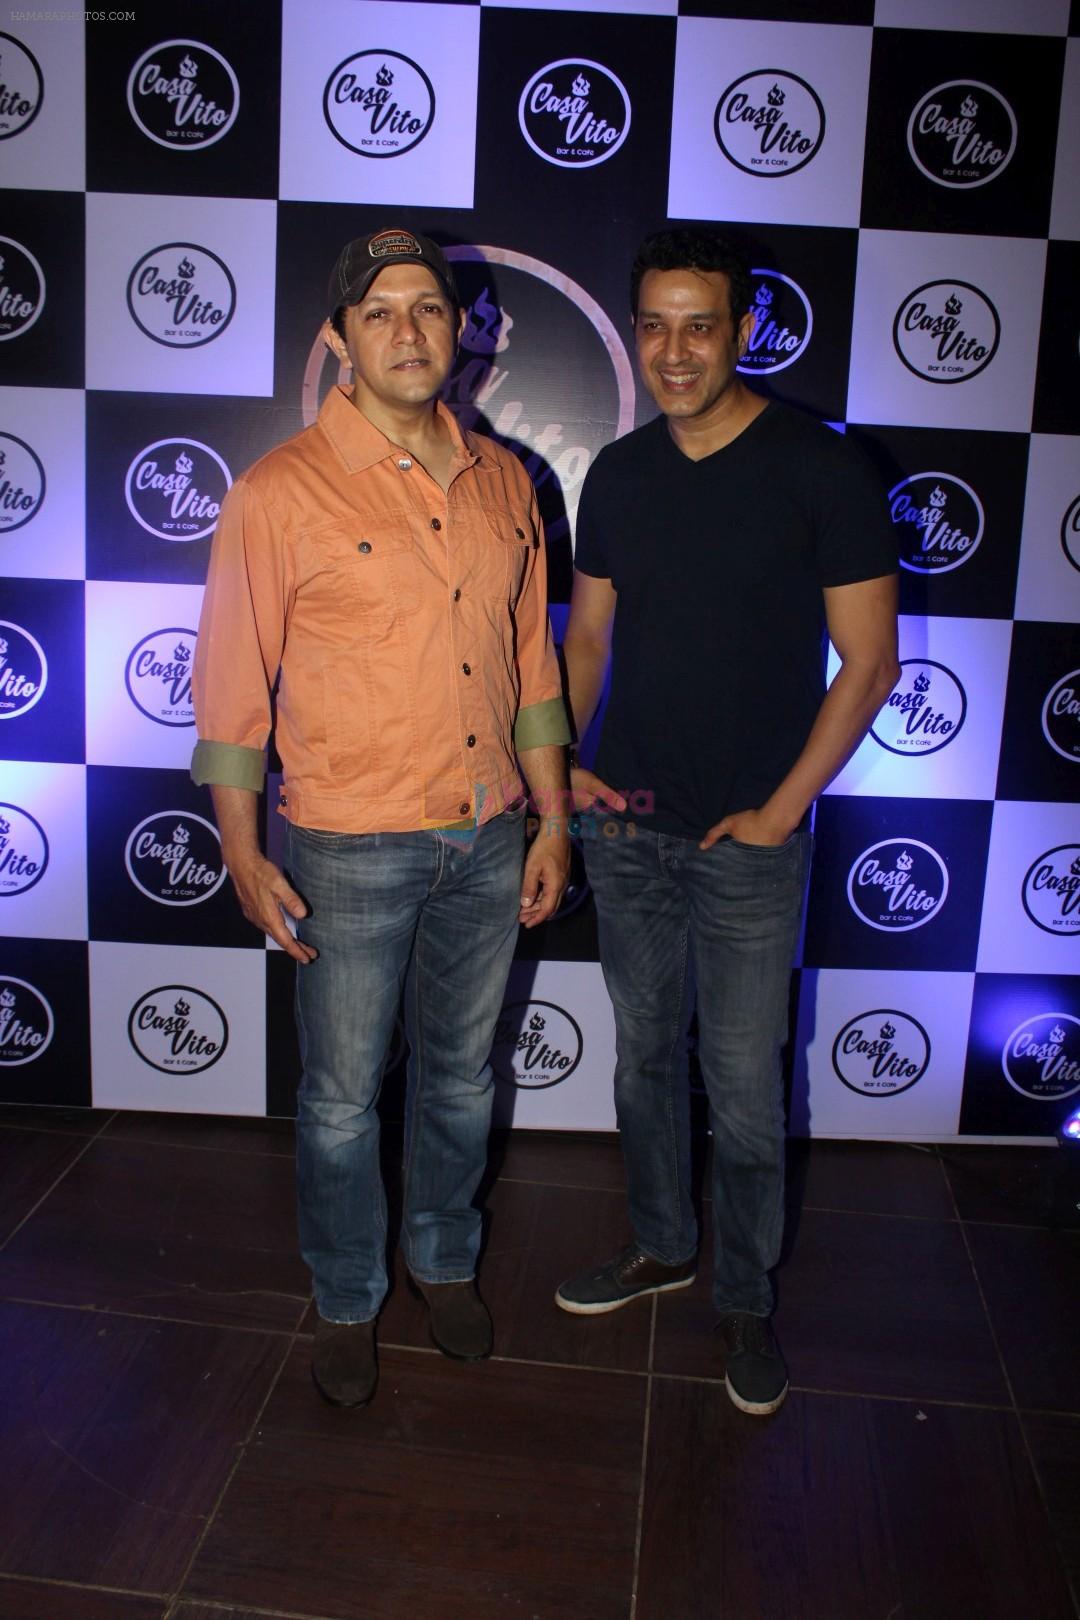 Kabir Sadanand at the Launch Of Casa Vito-Bar & Cafe on 30th March 2017